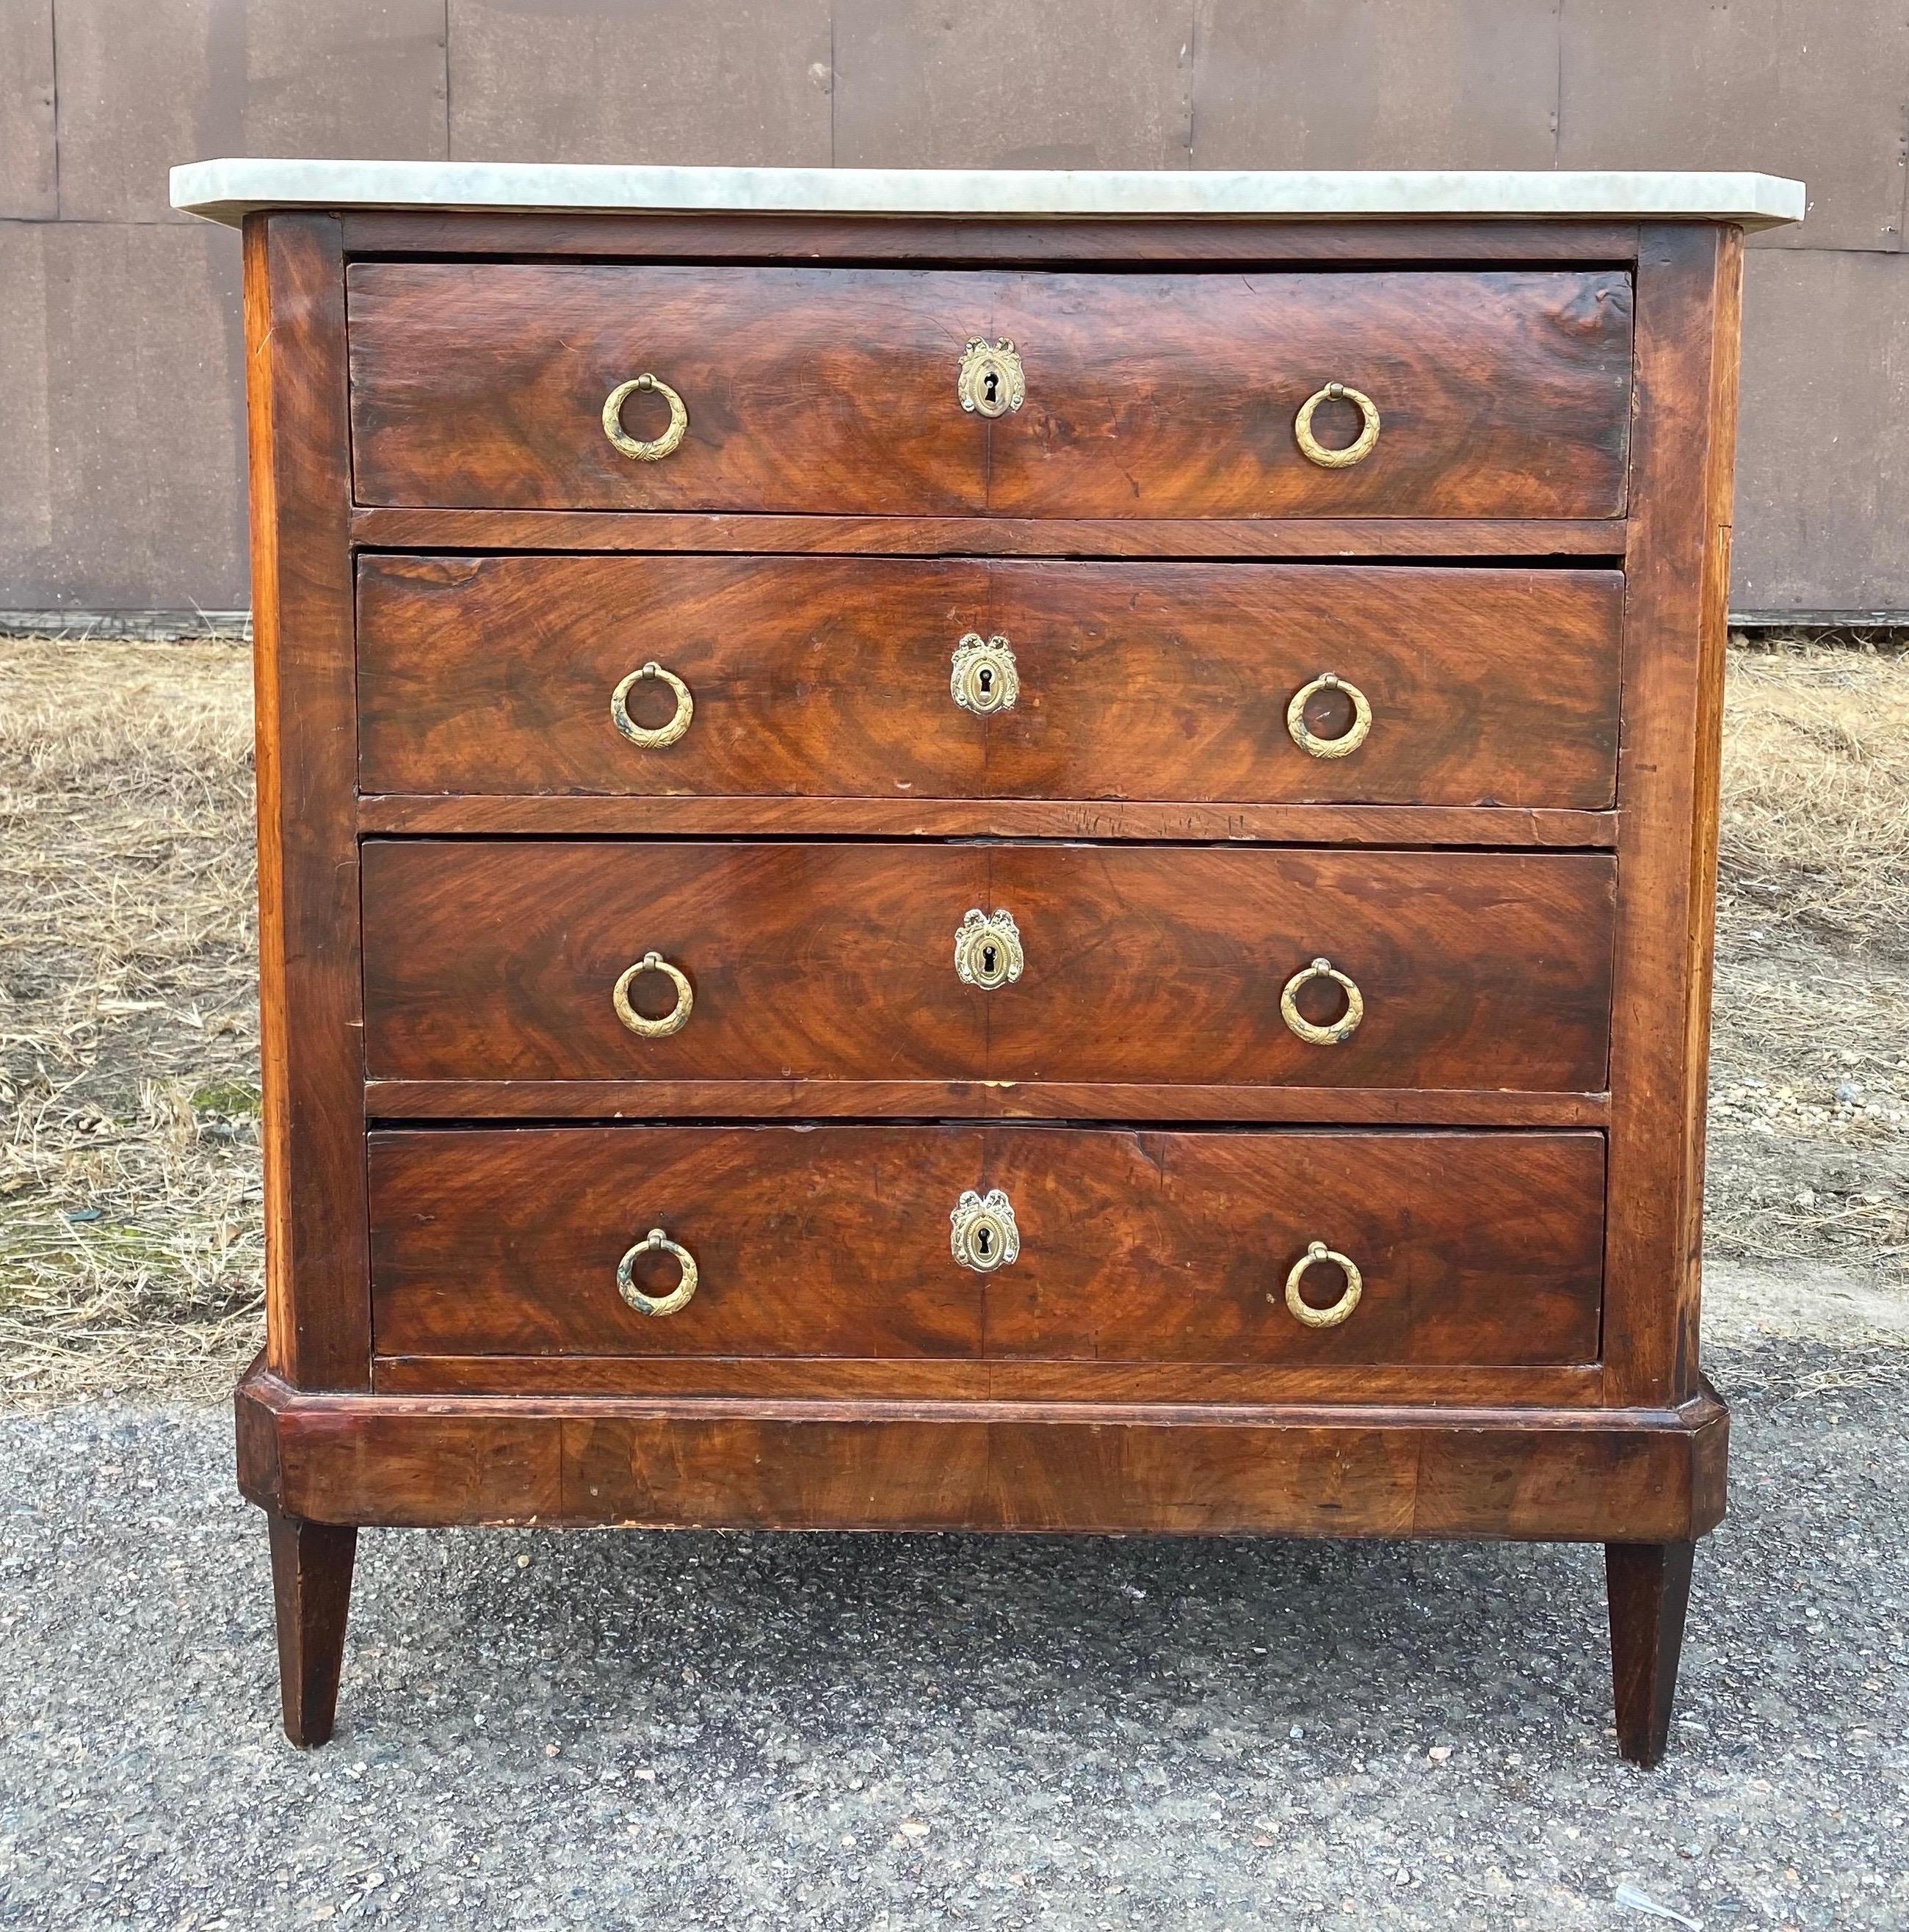 19th century French marble top mahogany chest of drawers with canted corners, tapered feet and original hardware. Great petite size- would work great as a bedside chest or side table.